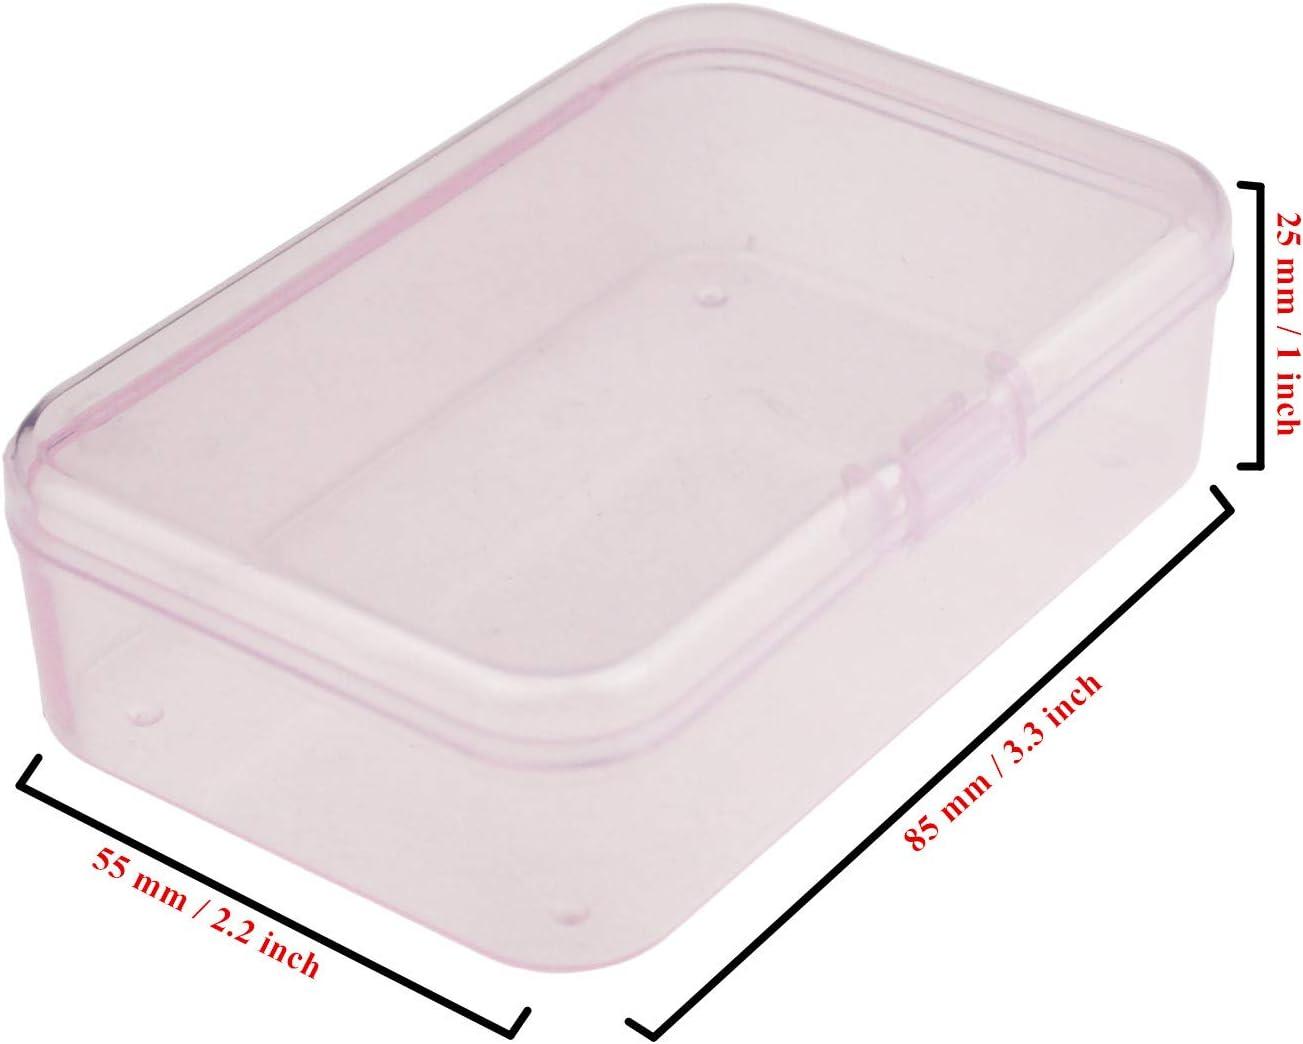  Goodma 30 Pieces Mini Rectangular Plastic Boxes Empty Storage  Organizer Containers with Hinged Lids for Small Items and Other Craft  Projects (Pink, 2.6 x 1.8 x 0.8 inch) : Arts, Crafts & Sewing